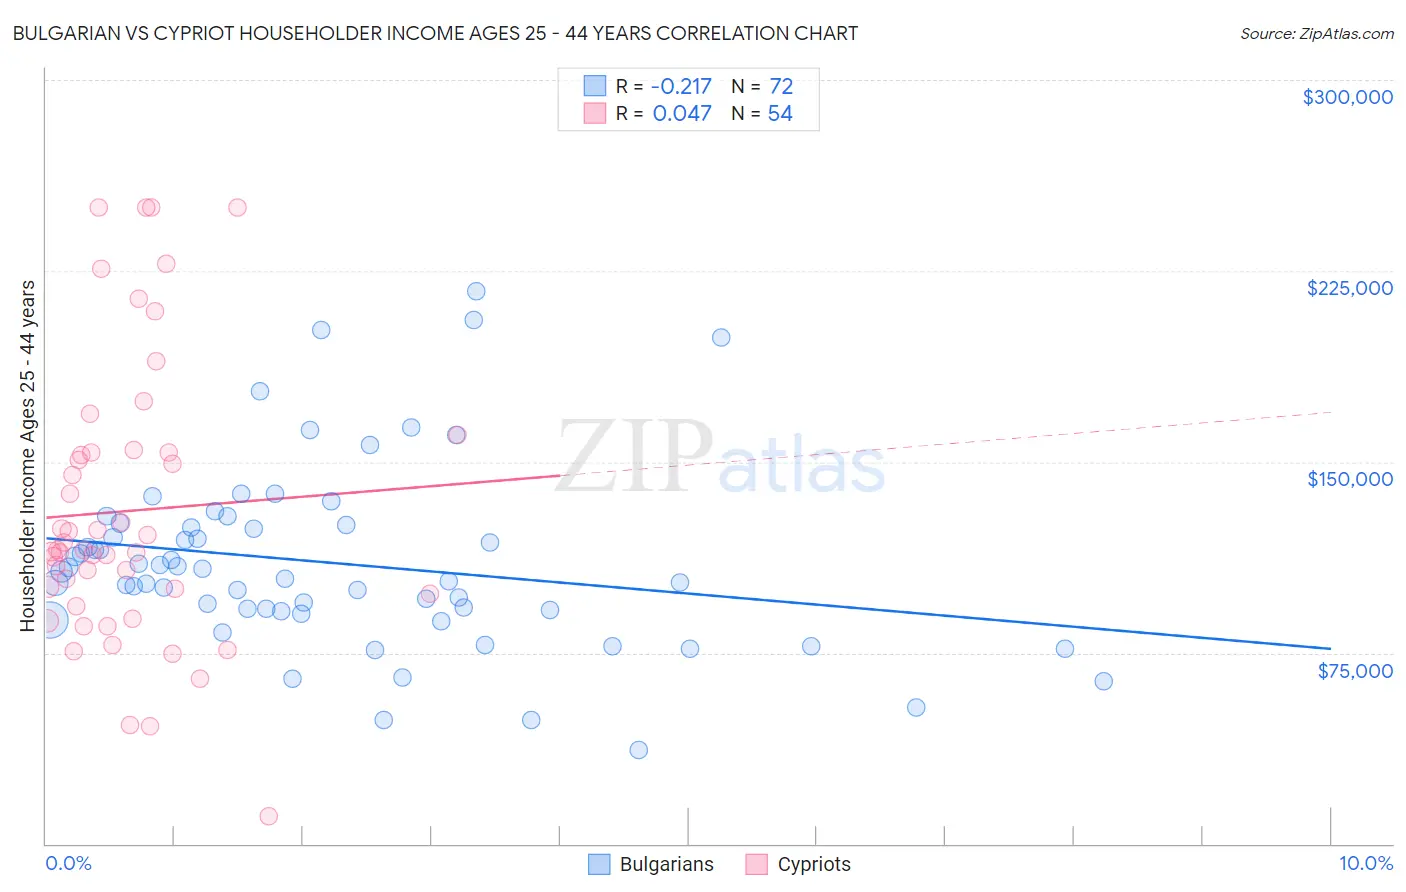 Bulgarian vs Cypriot Householder Income Ages 25 - 44 years